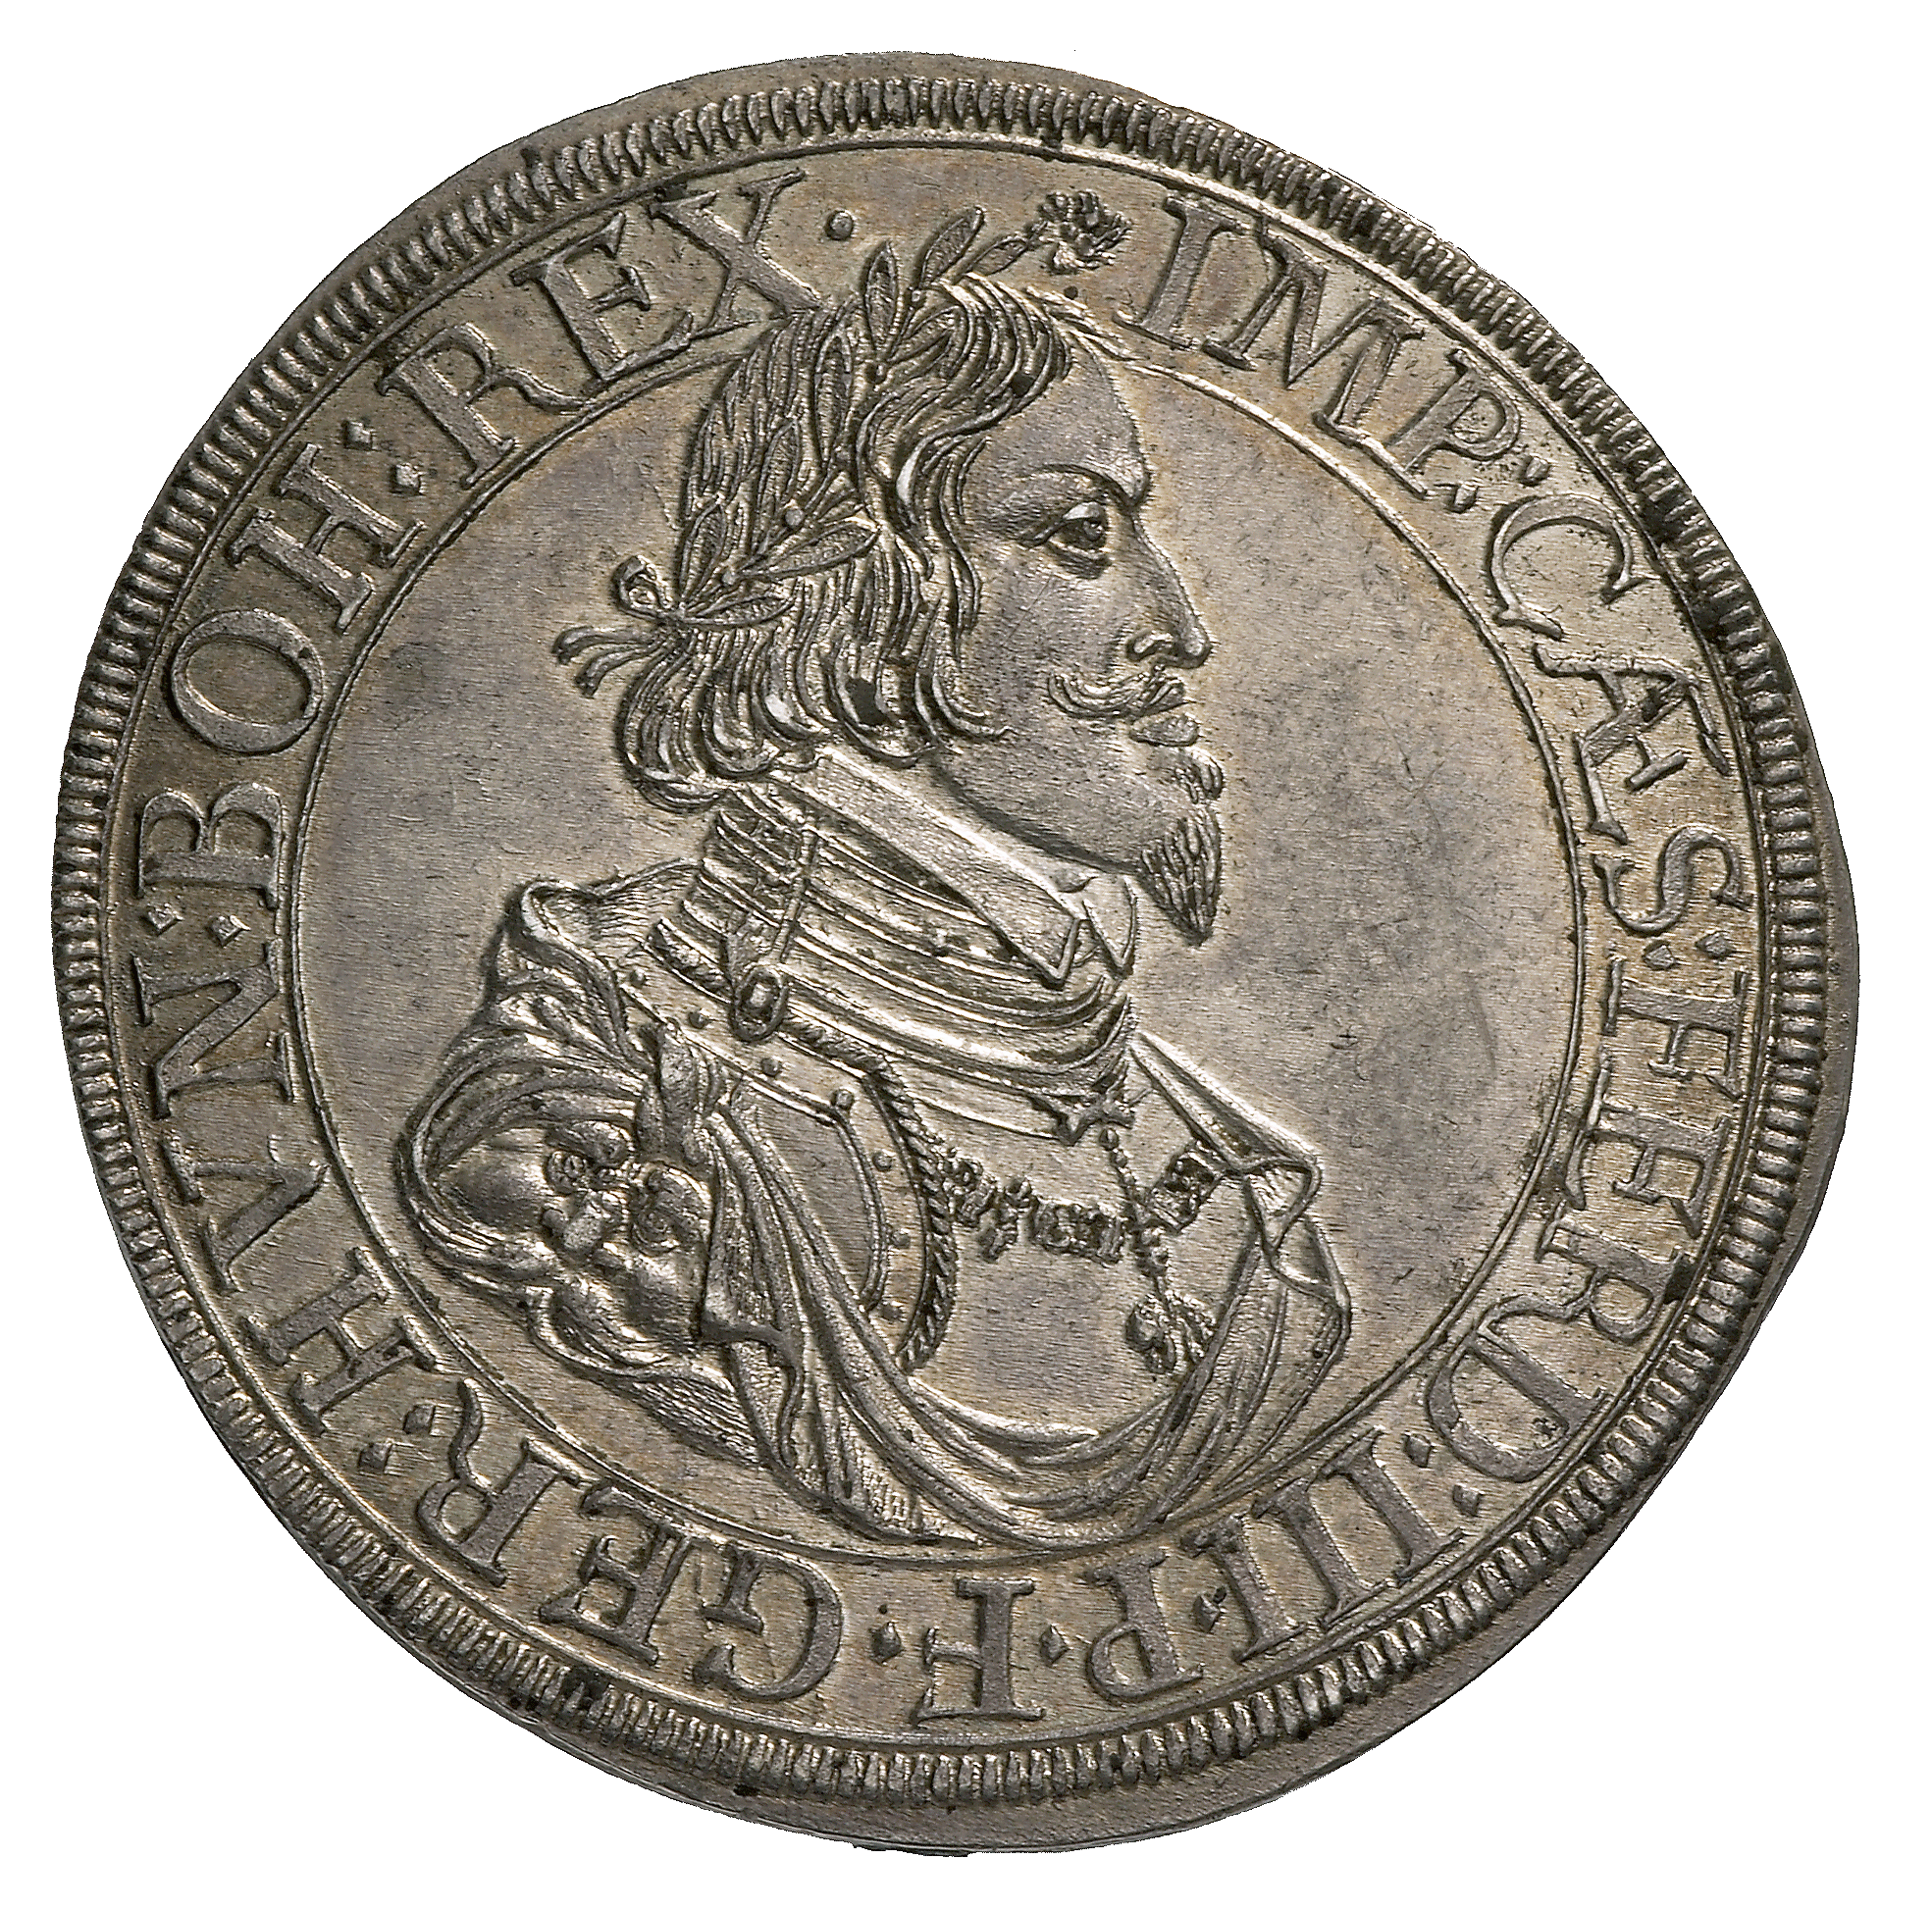 Holy Roman Empire, Imperial City of Augsburg, Taler 1641 (obverse)